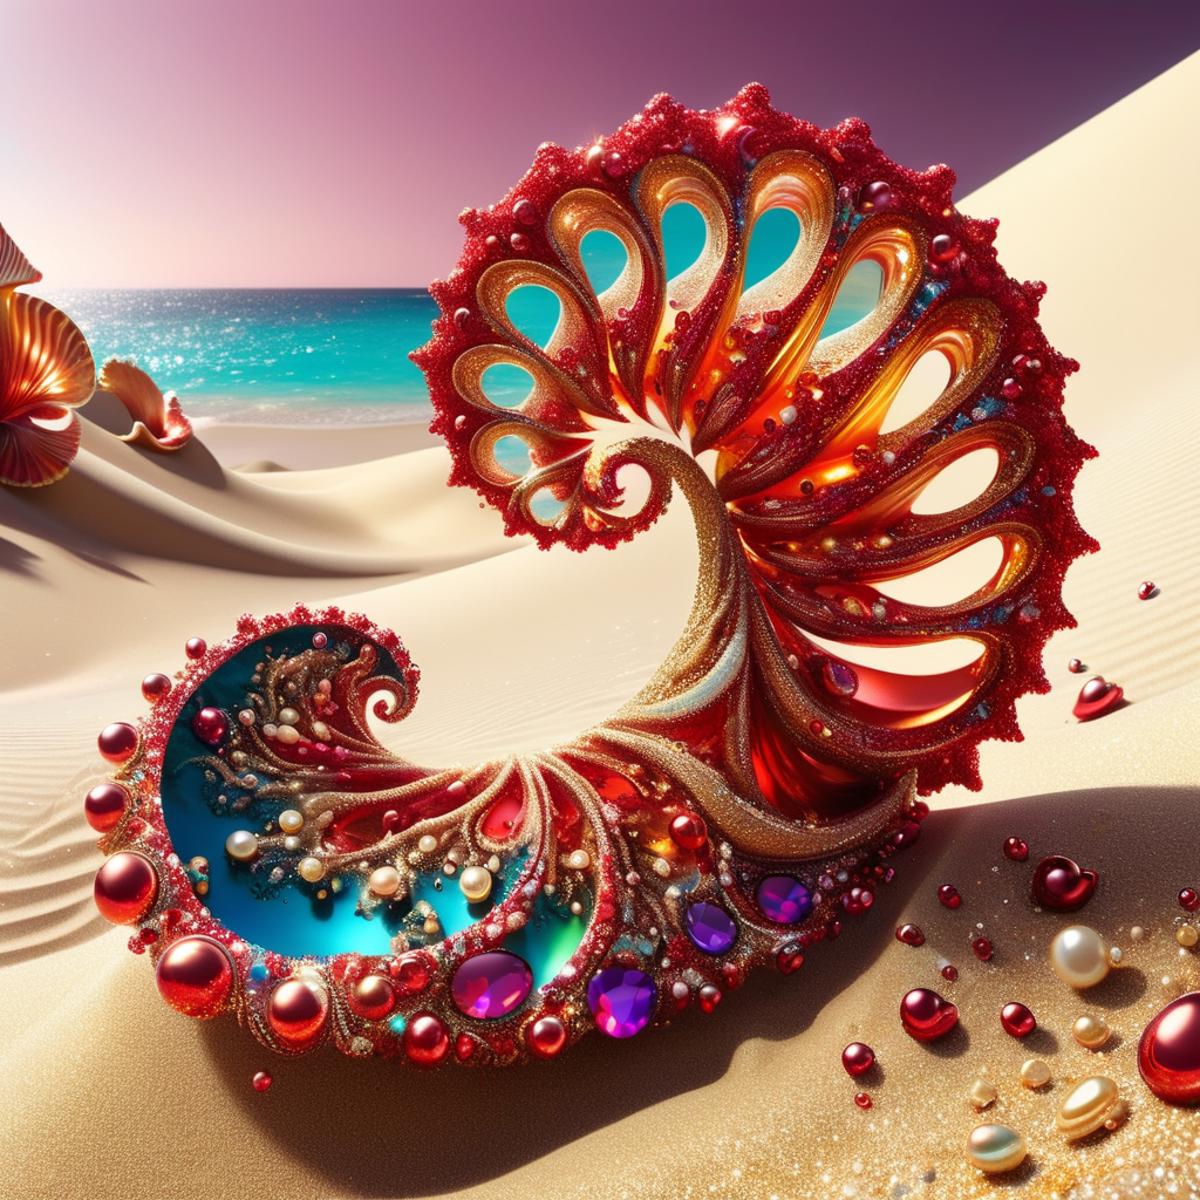 A colorful jewelry inspired design on a beach.